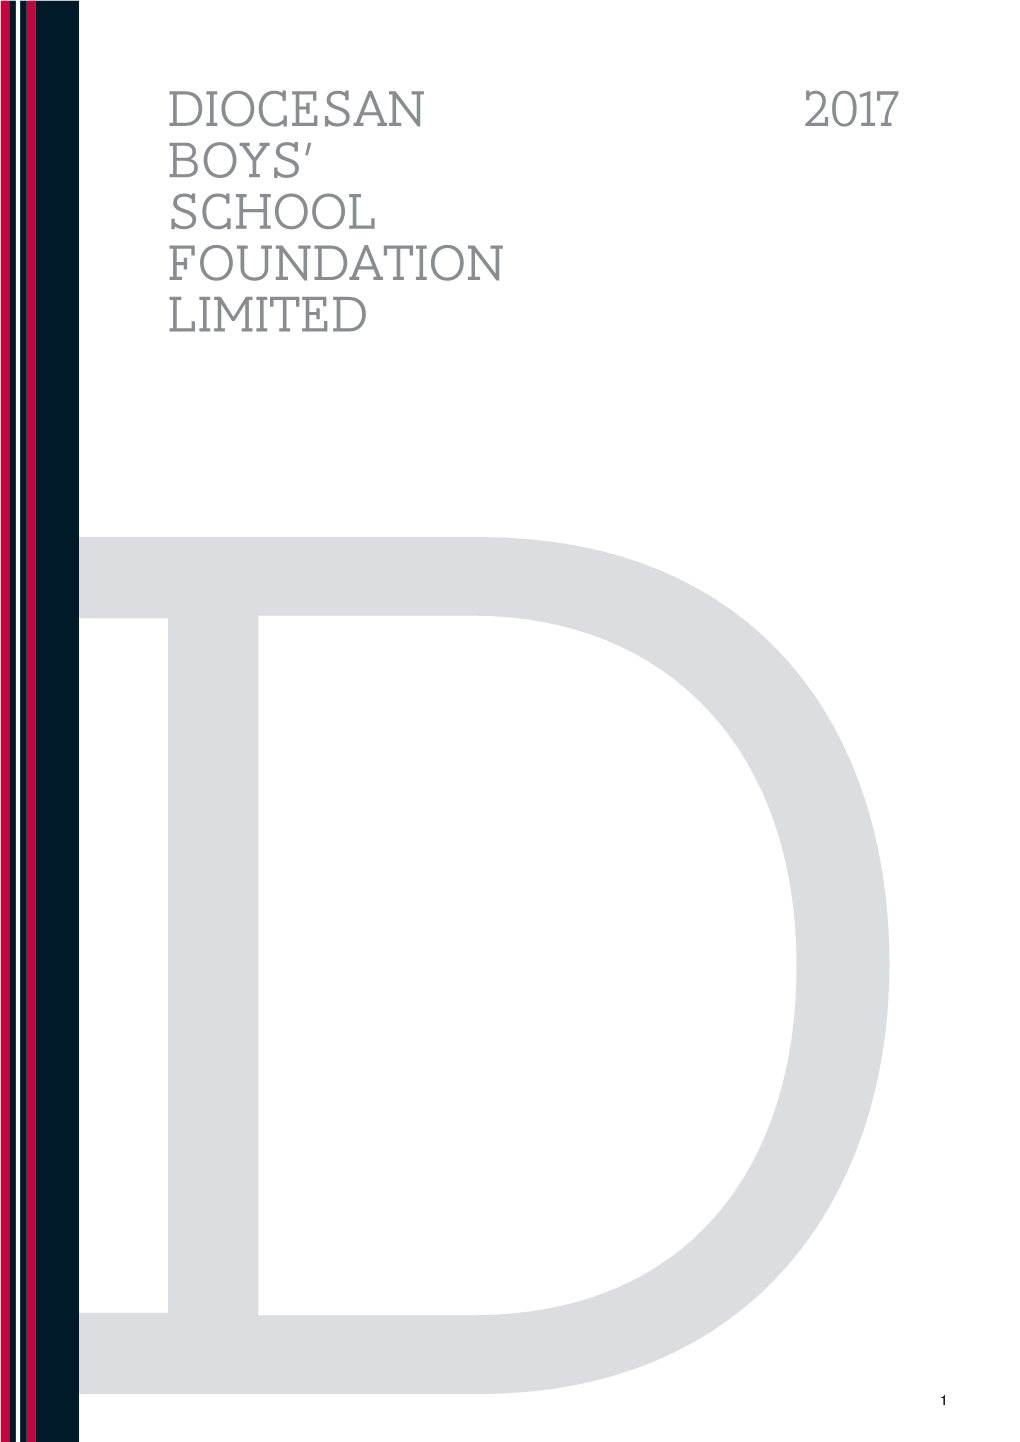 Foundation Yearbook 2017